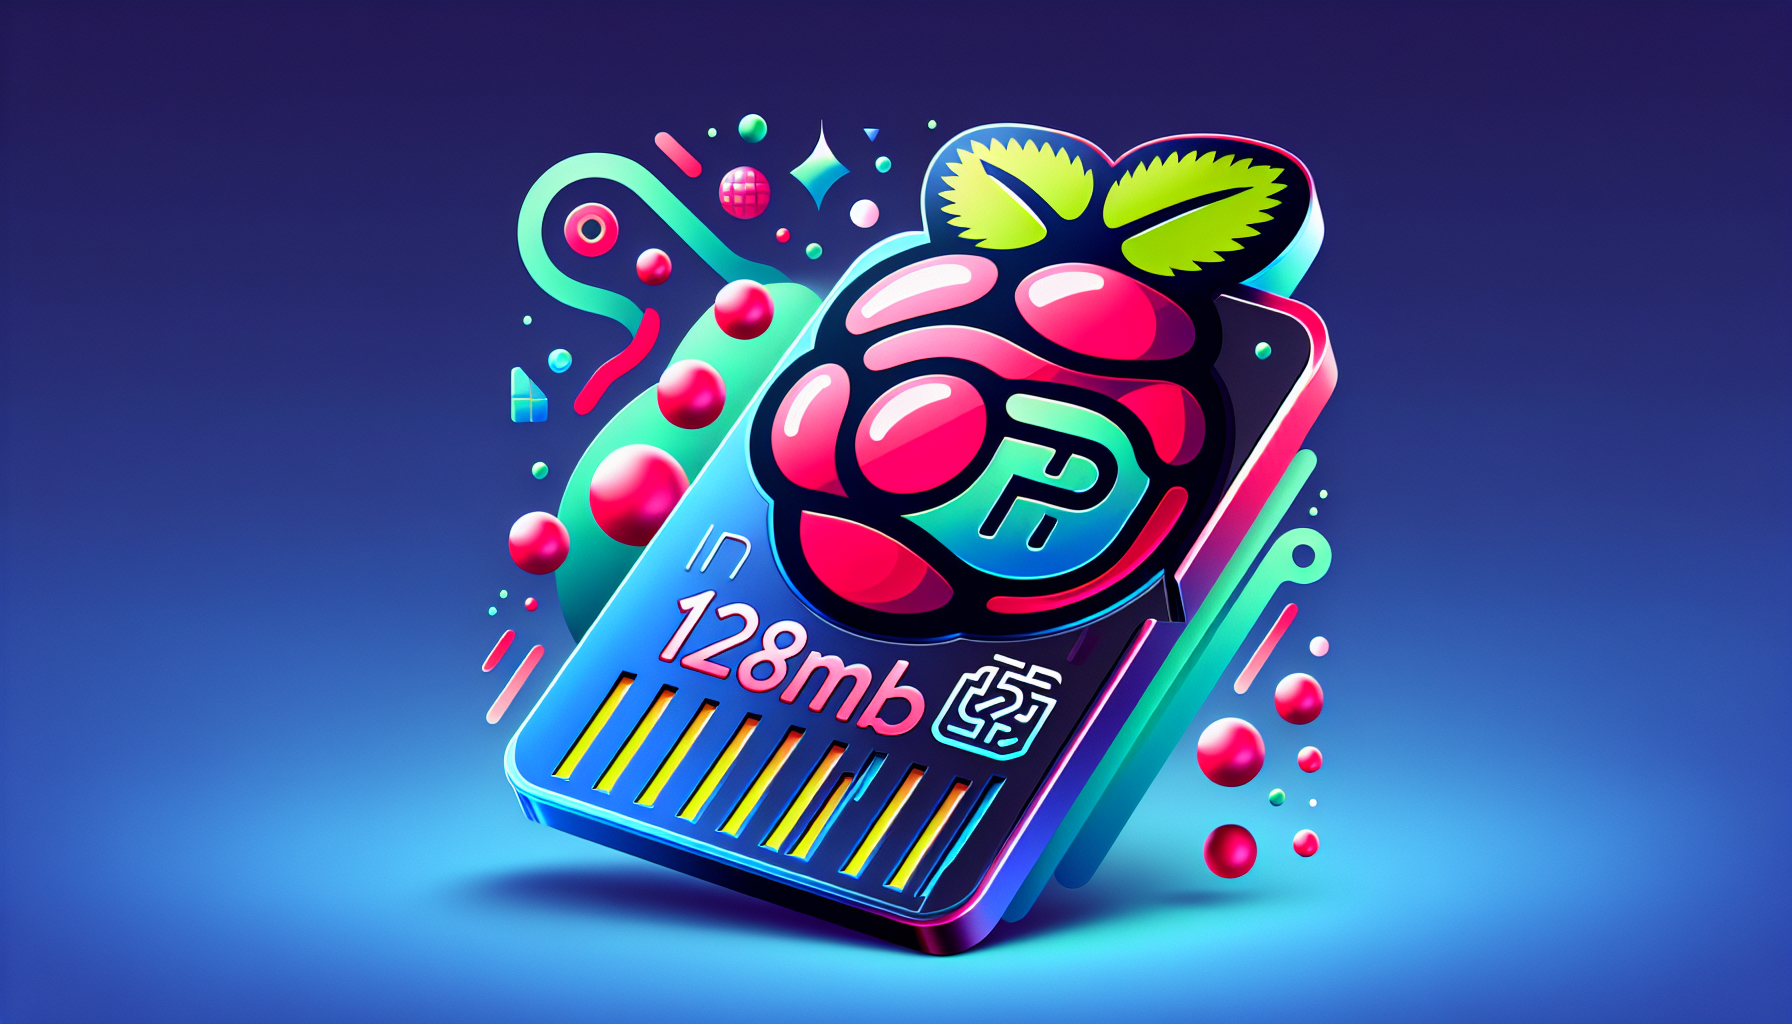 Raspberry PI boot from 128MB microsd card